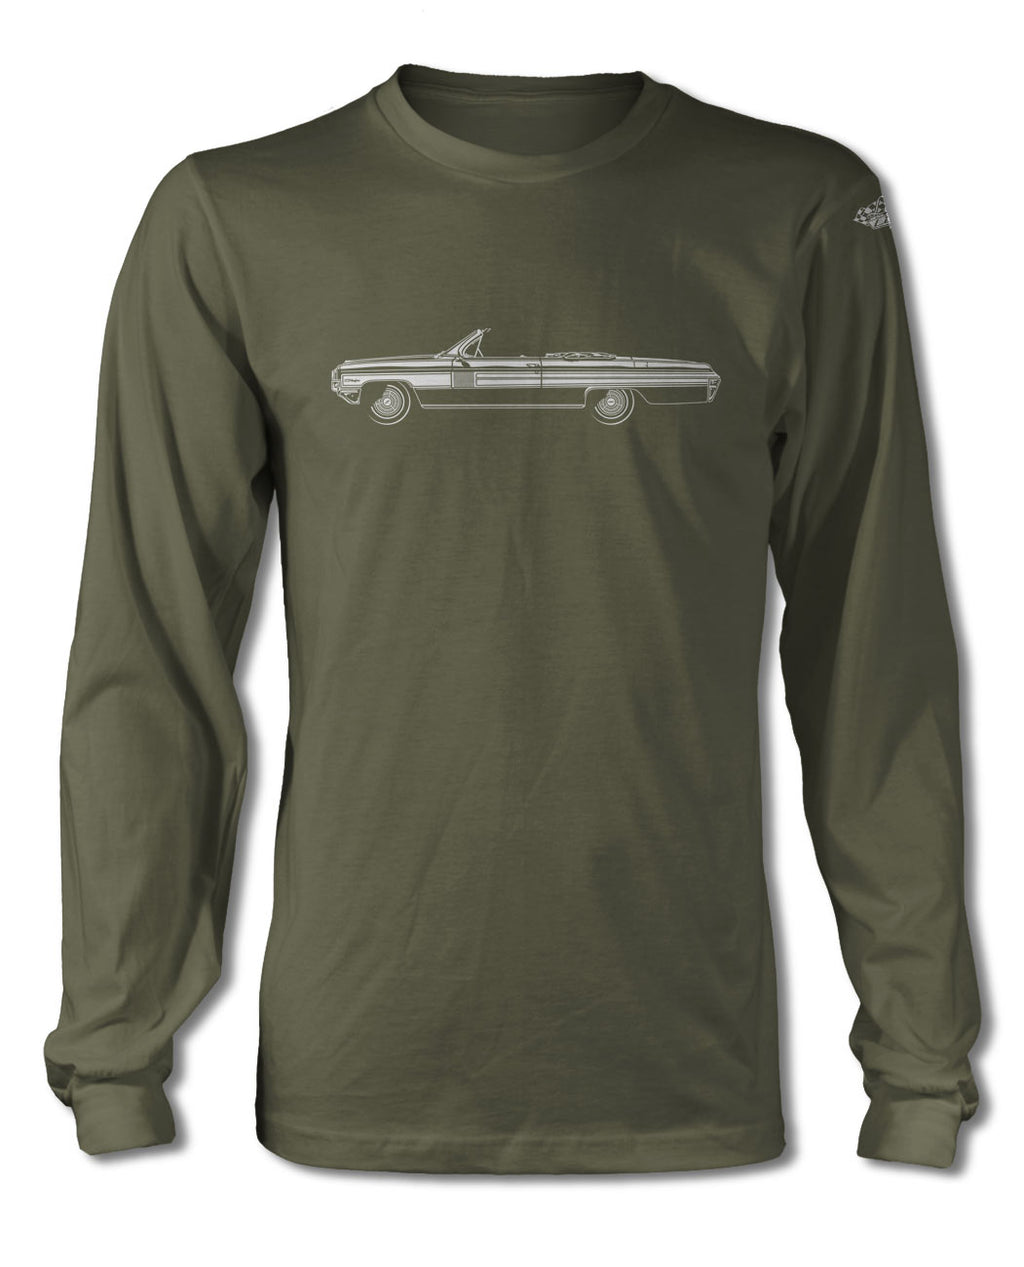 1962 Oldsmobile Starfire convertible T-Shirt - Long Sleeves - Side View